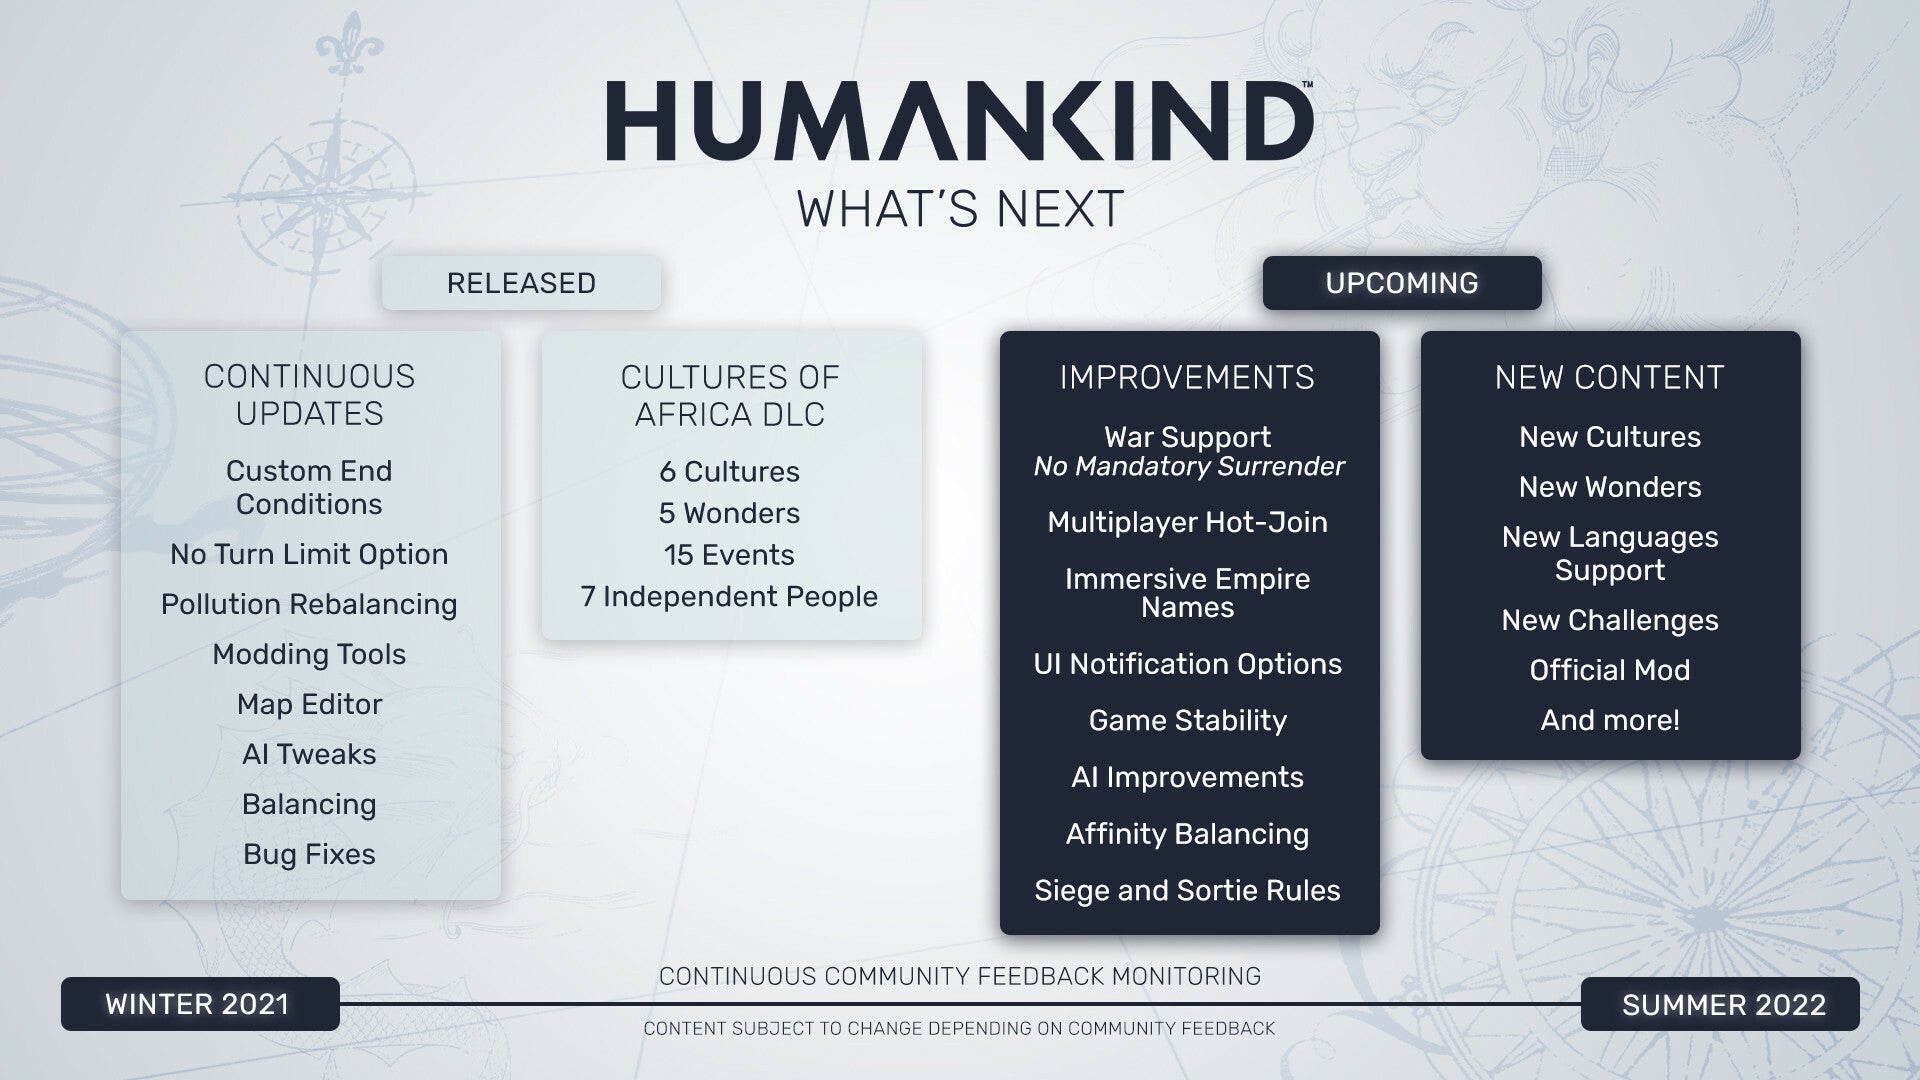 The plan for future Humankind updates.